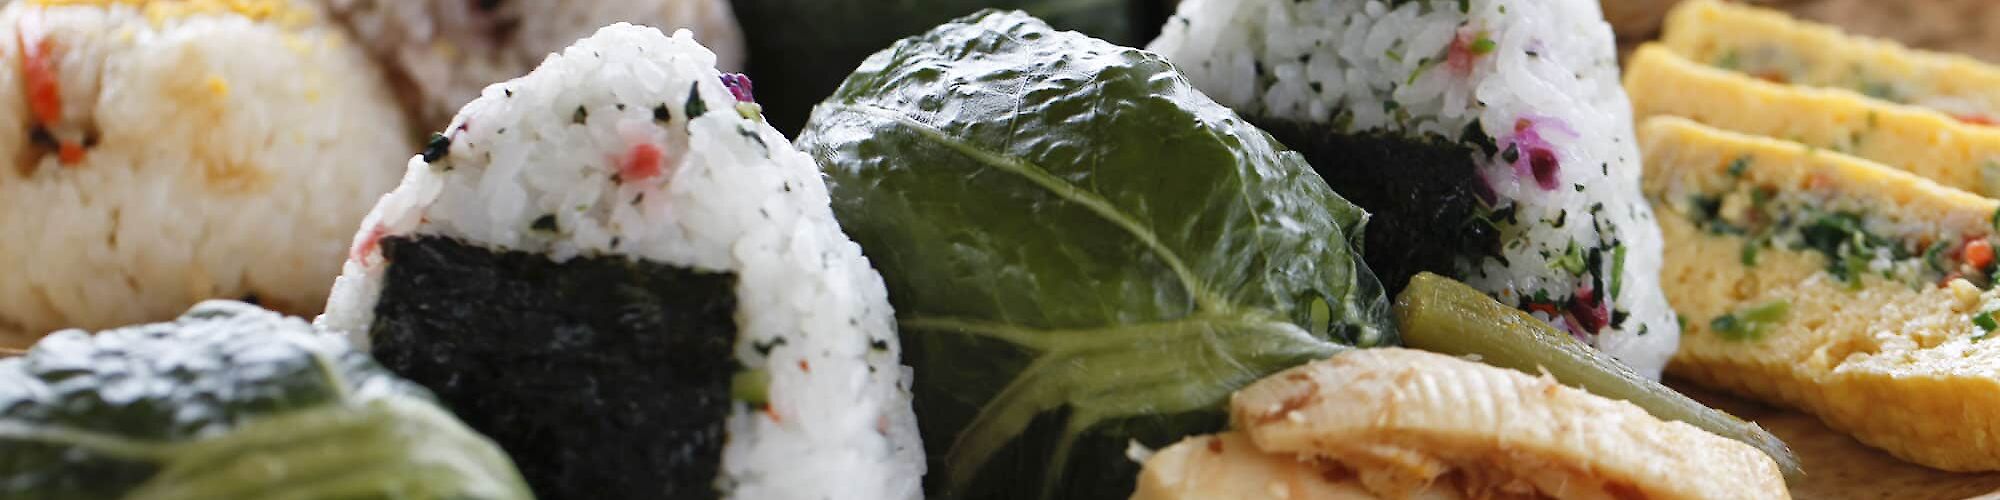 This image features a plate with various types of onigiri (Japanese rice balls) wrapped in seaweed and other leaves, alongside some side dishes.